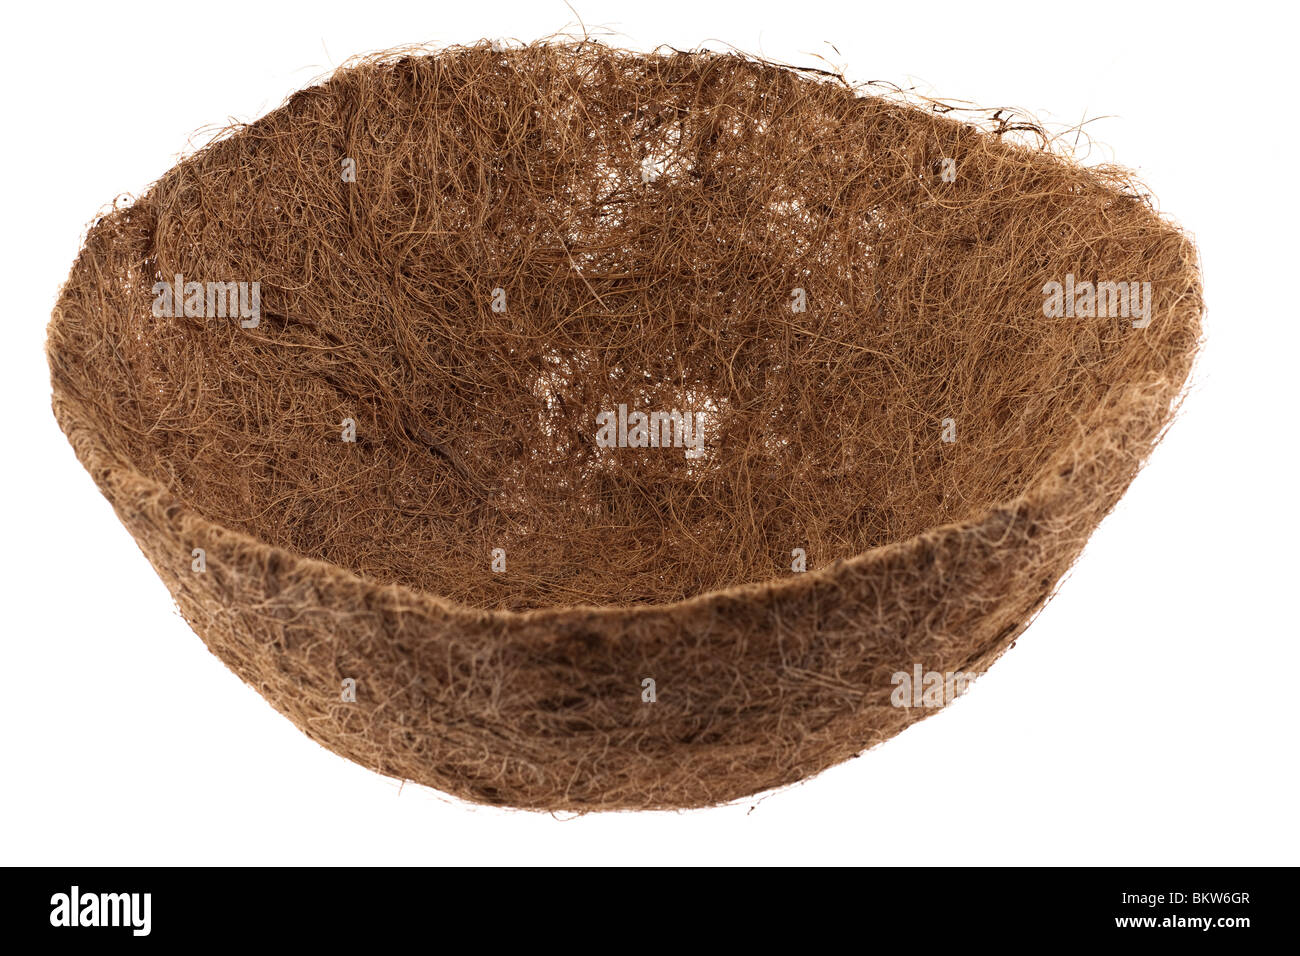 14 inch coco hanging basket liner Stock Photo